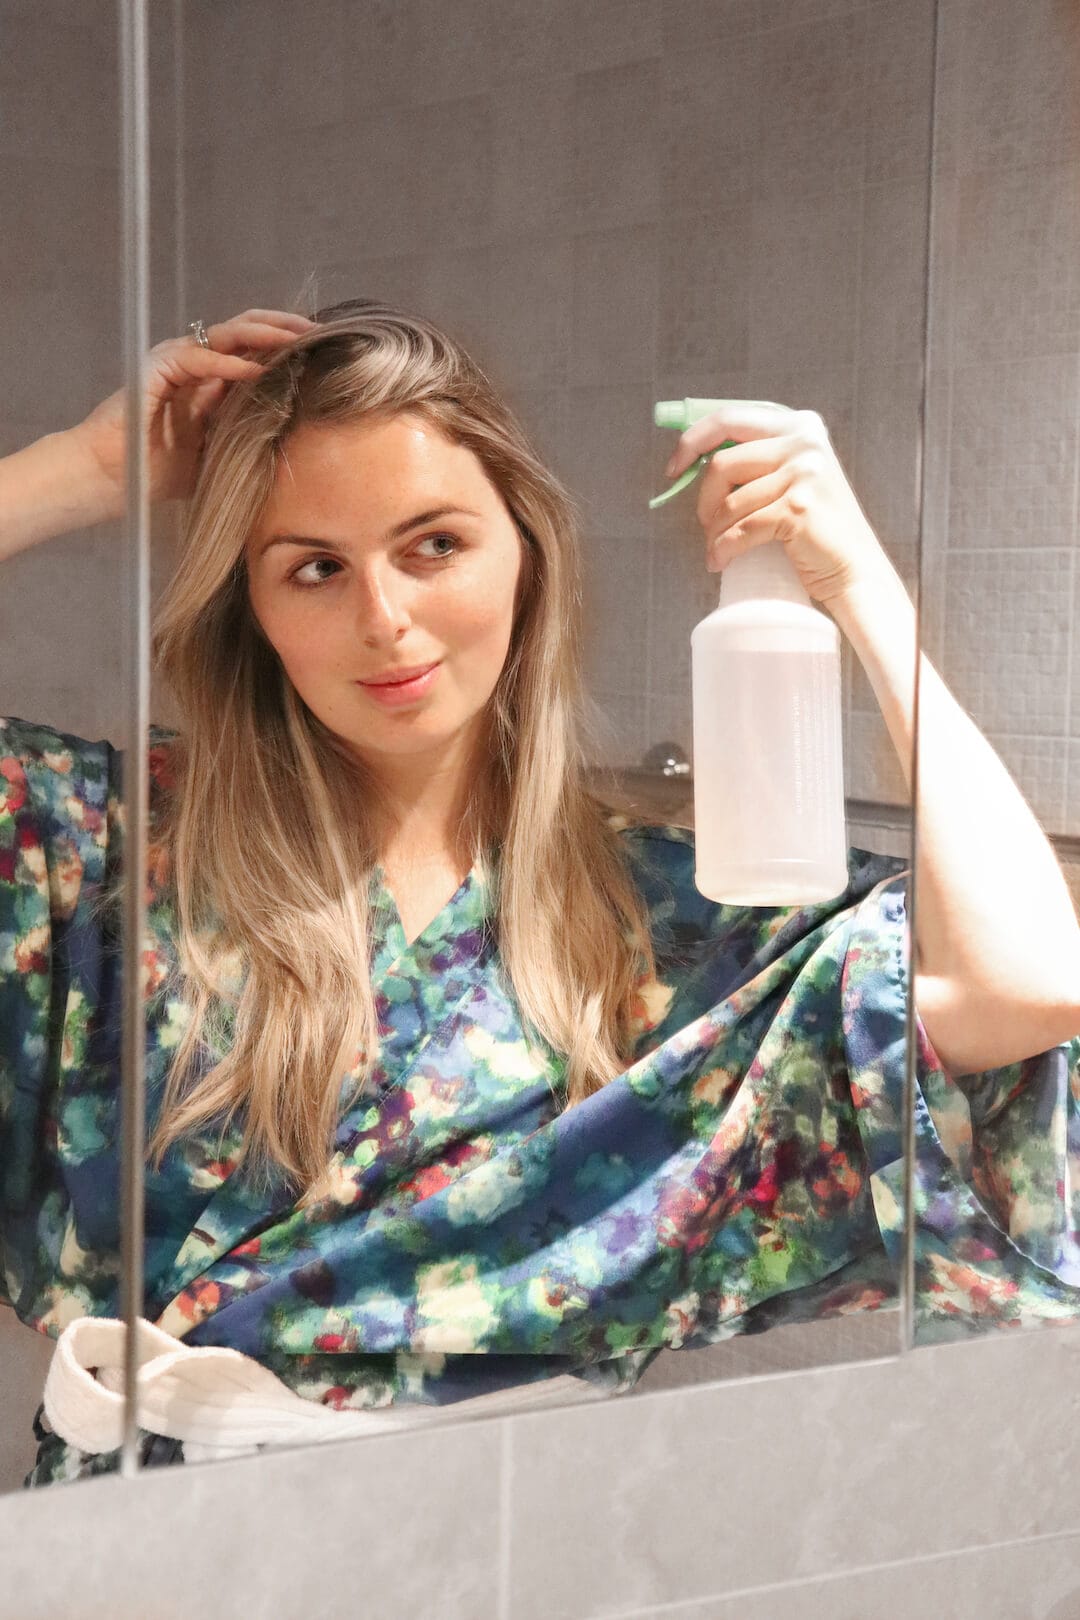 how-to-get-clean-hair-after-working-out-without-washing